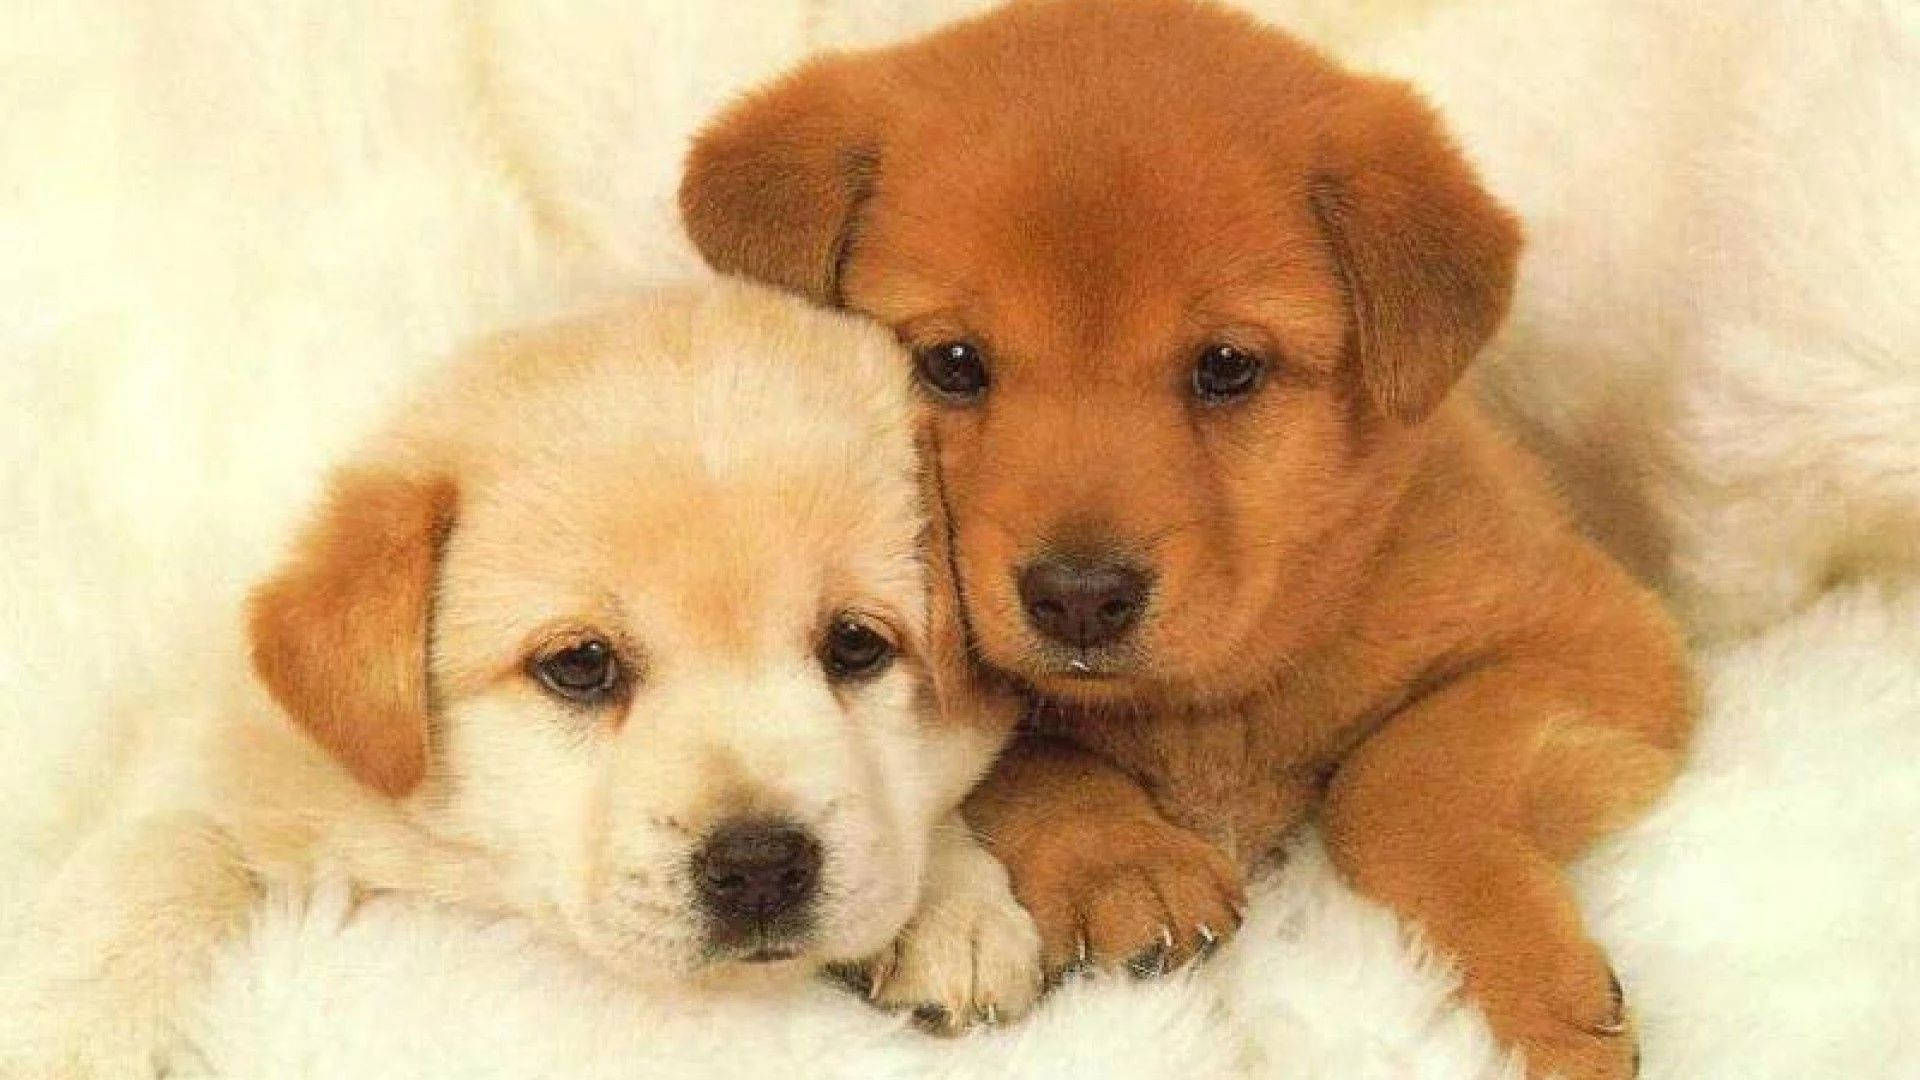 Two Sweet Puppies Wallpaper